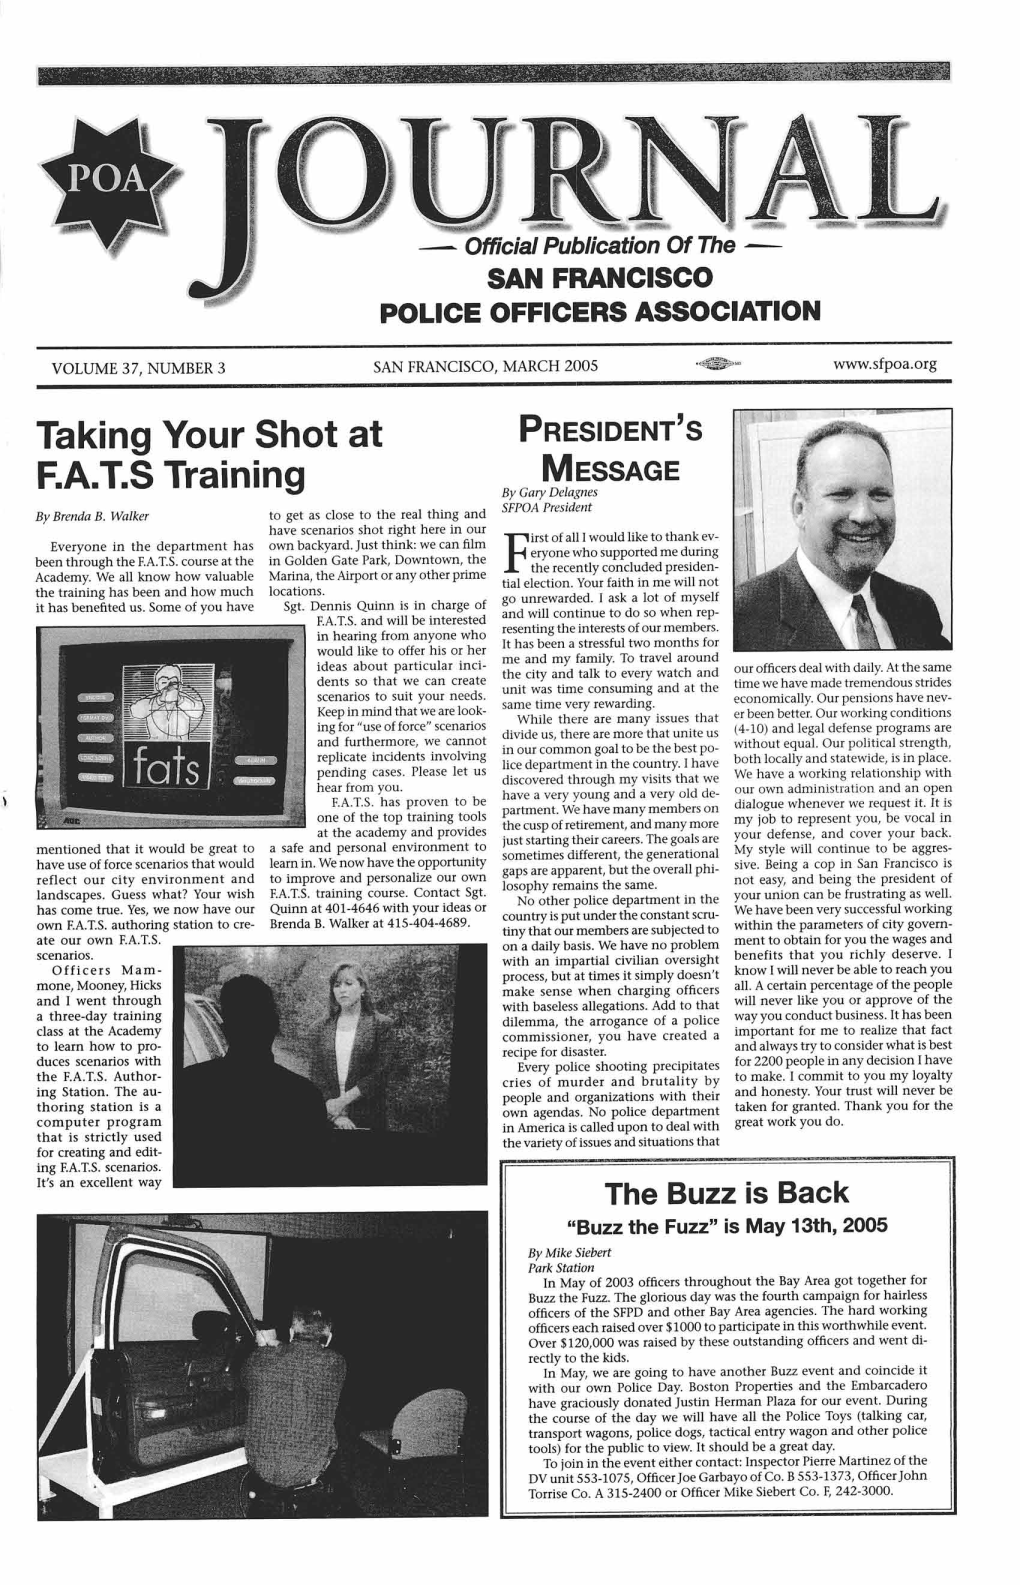 MARCH 2005 ------Taking Your Shot at PRESIDENT's MESSAGE F.A.T.S Training by Gary Delagnes SFPOA President by Brenda B